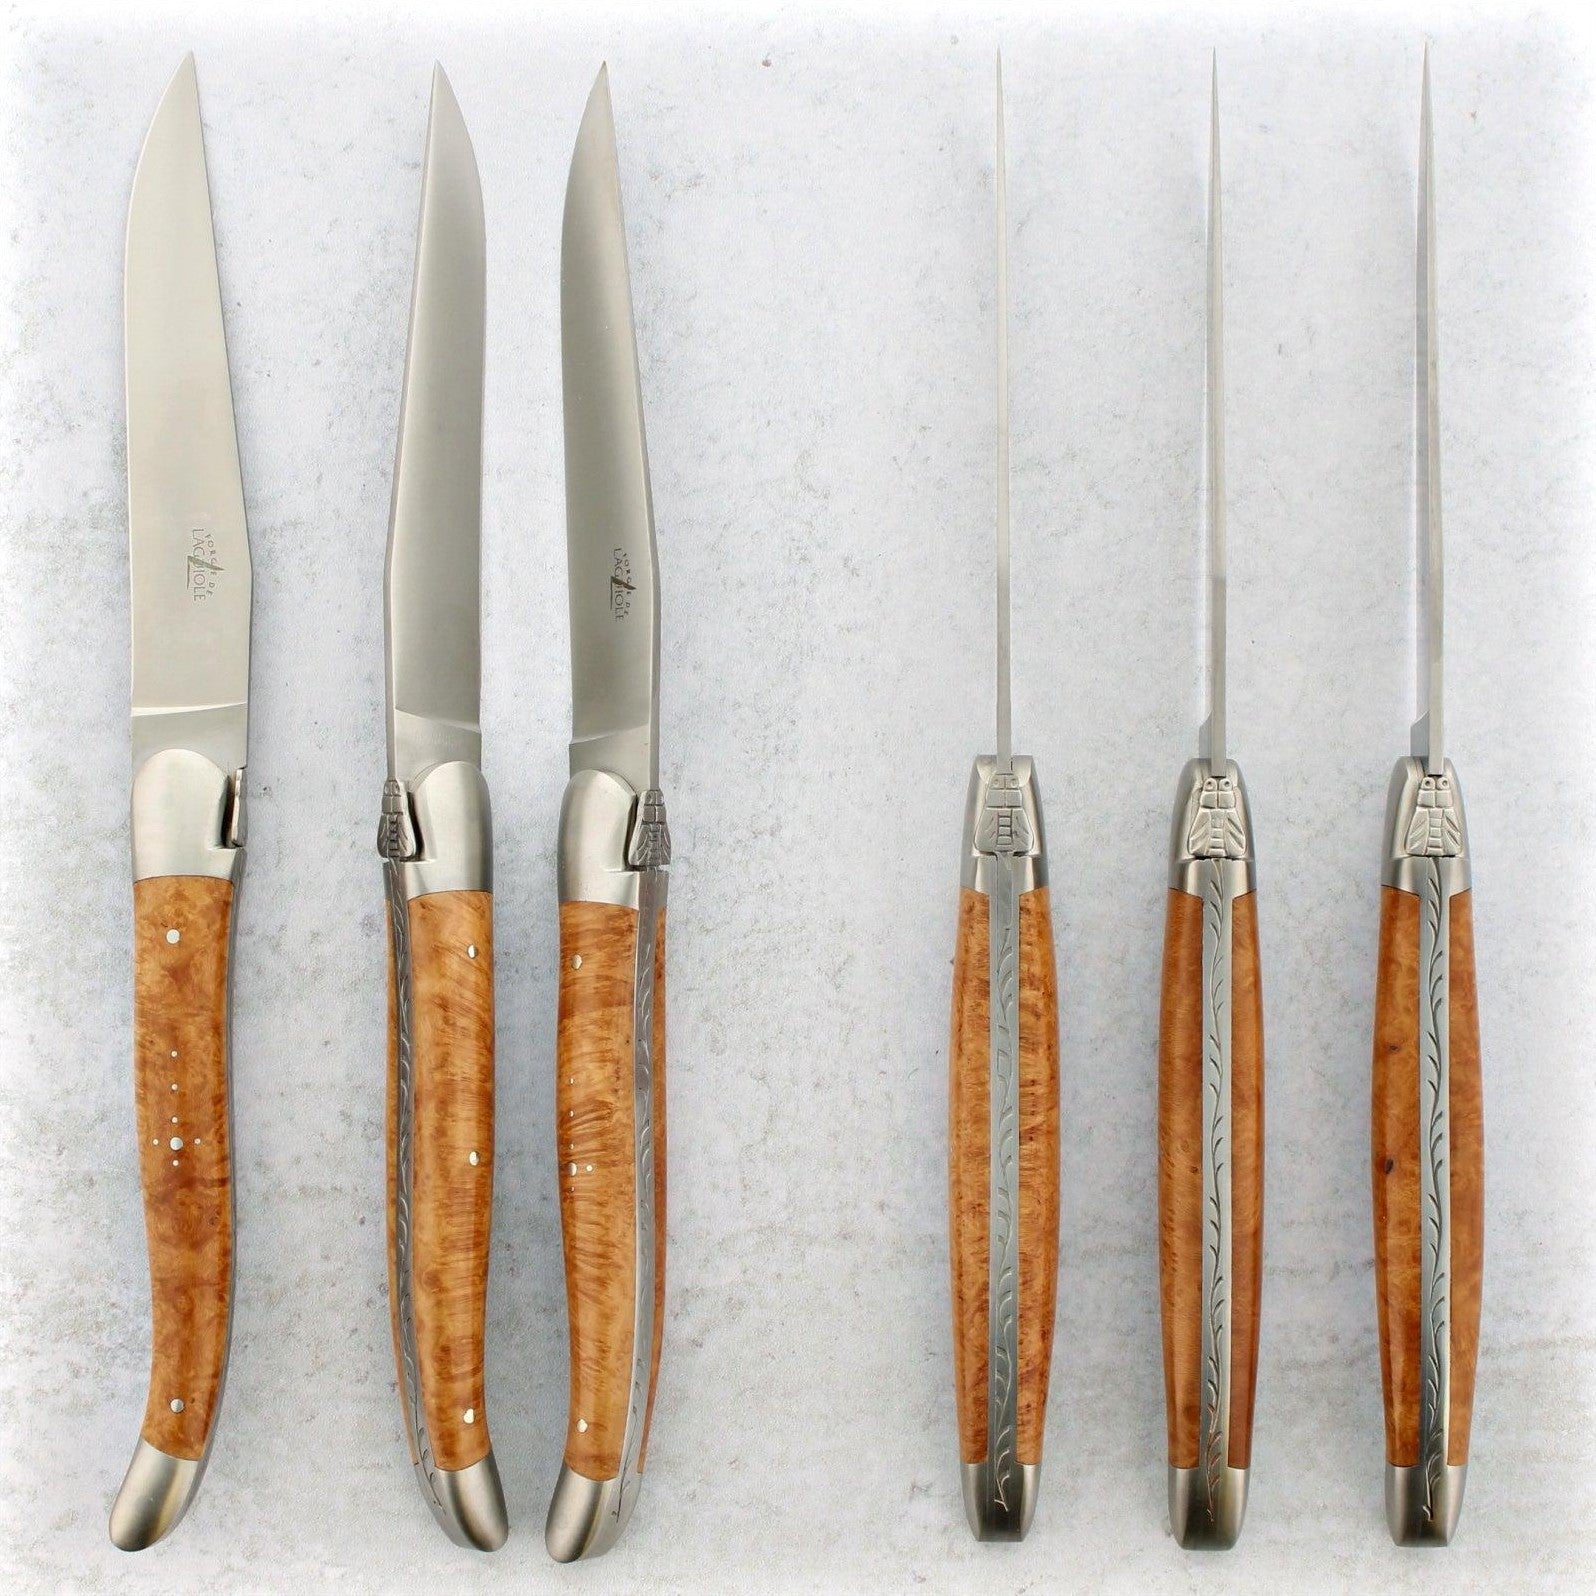 Steak Knives Wooden Handle Serrated Knife Set 8 box Wood Stainless